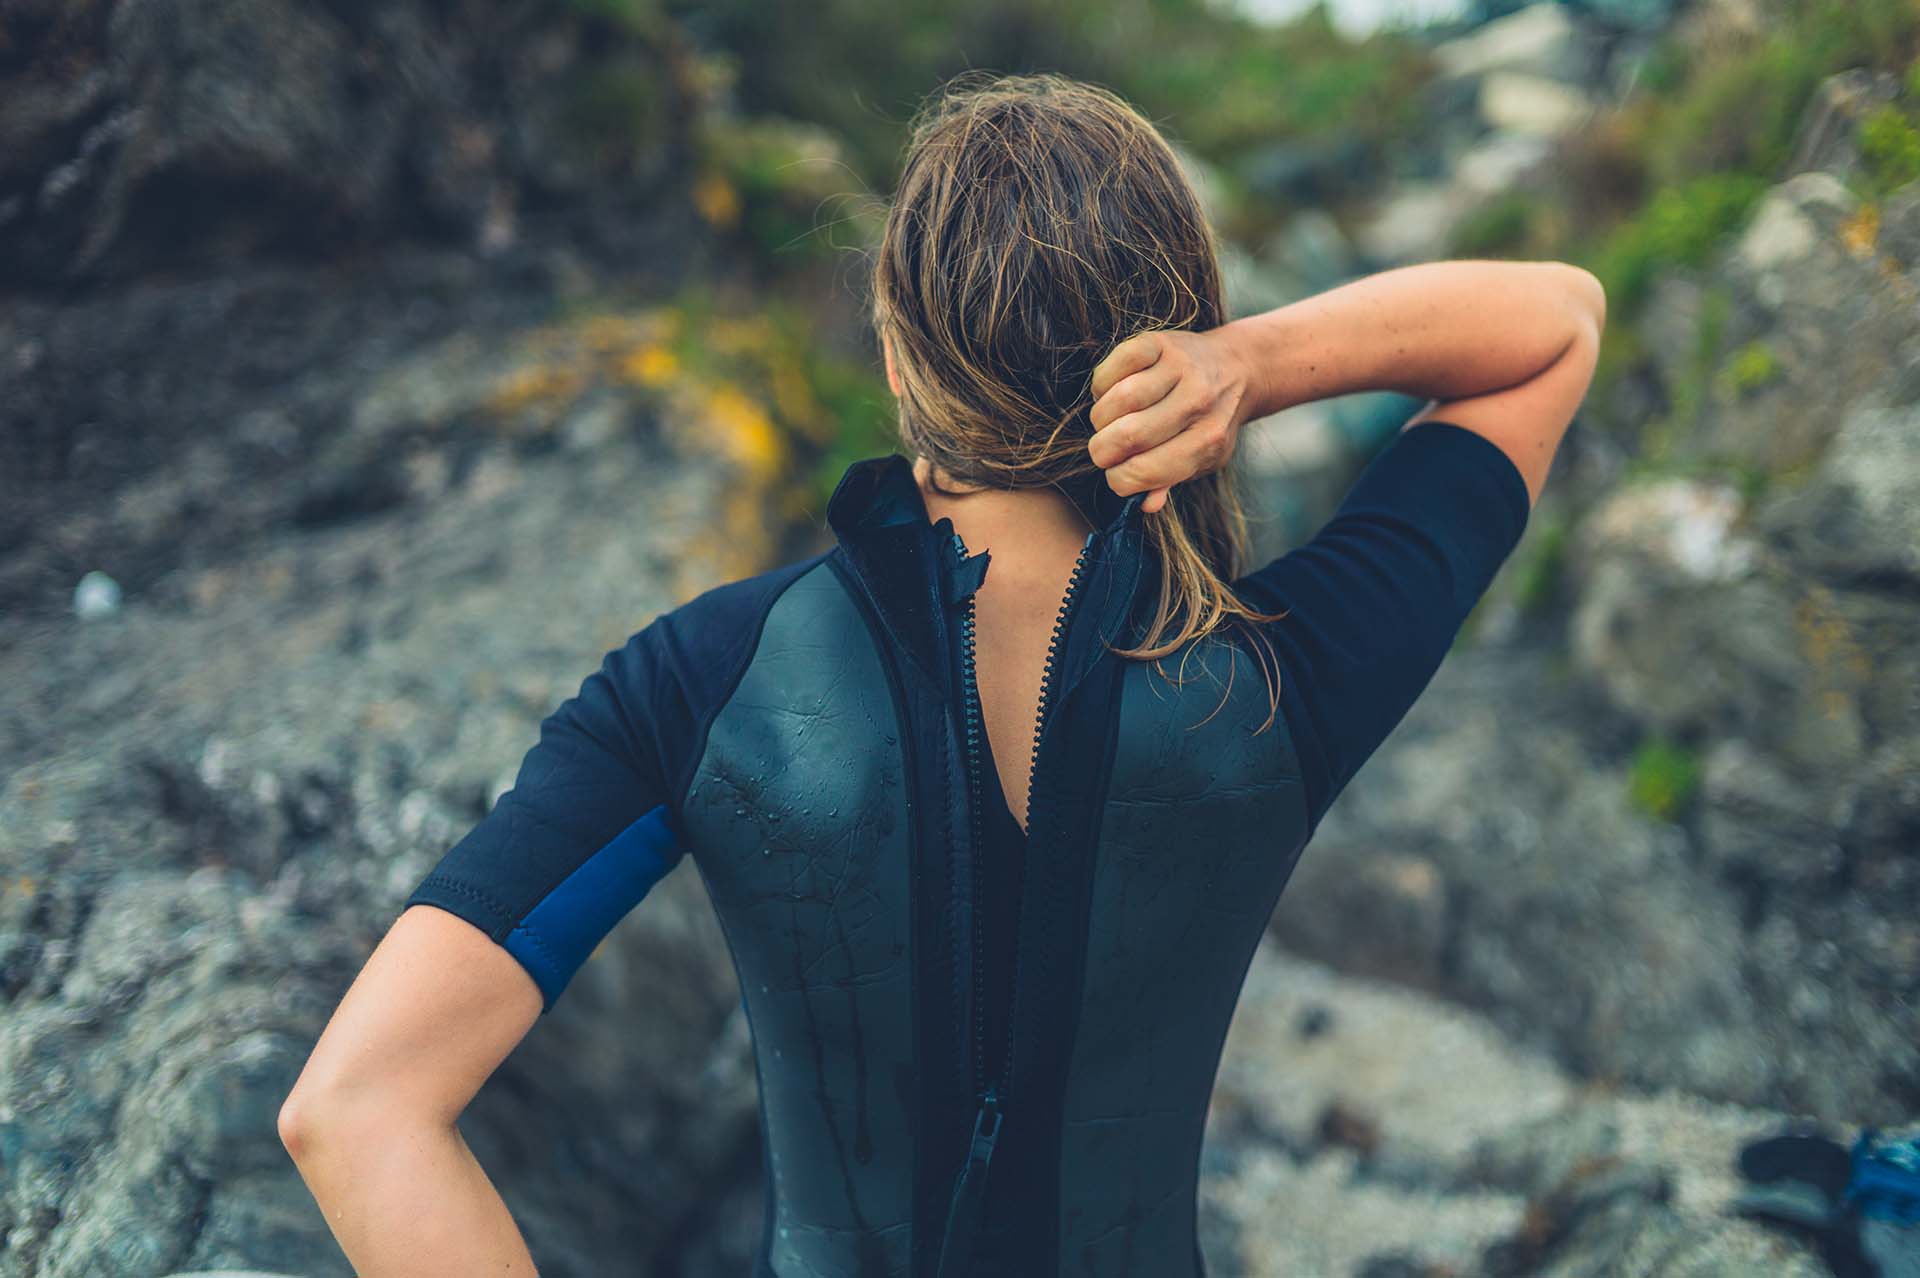 Woman in a wetsuit